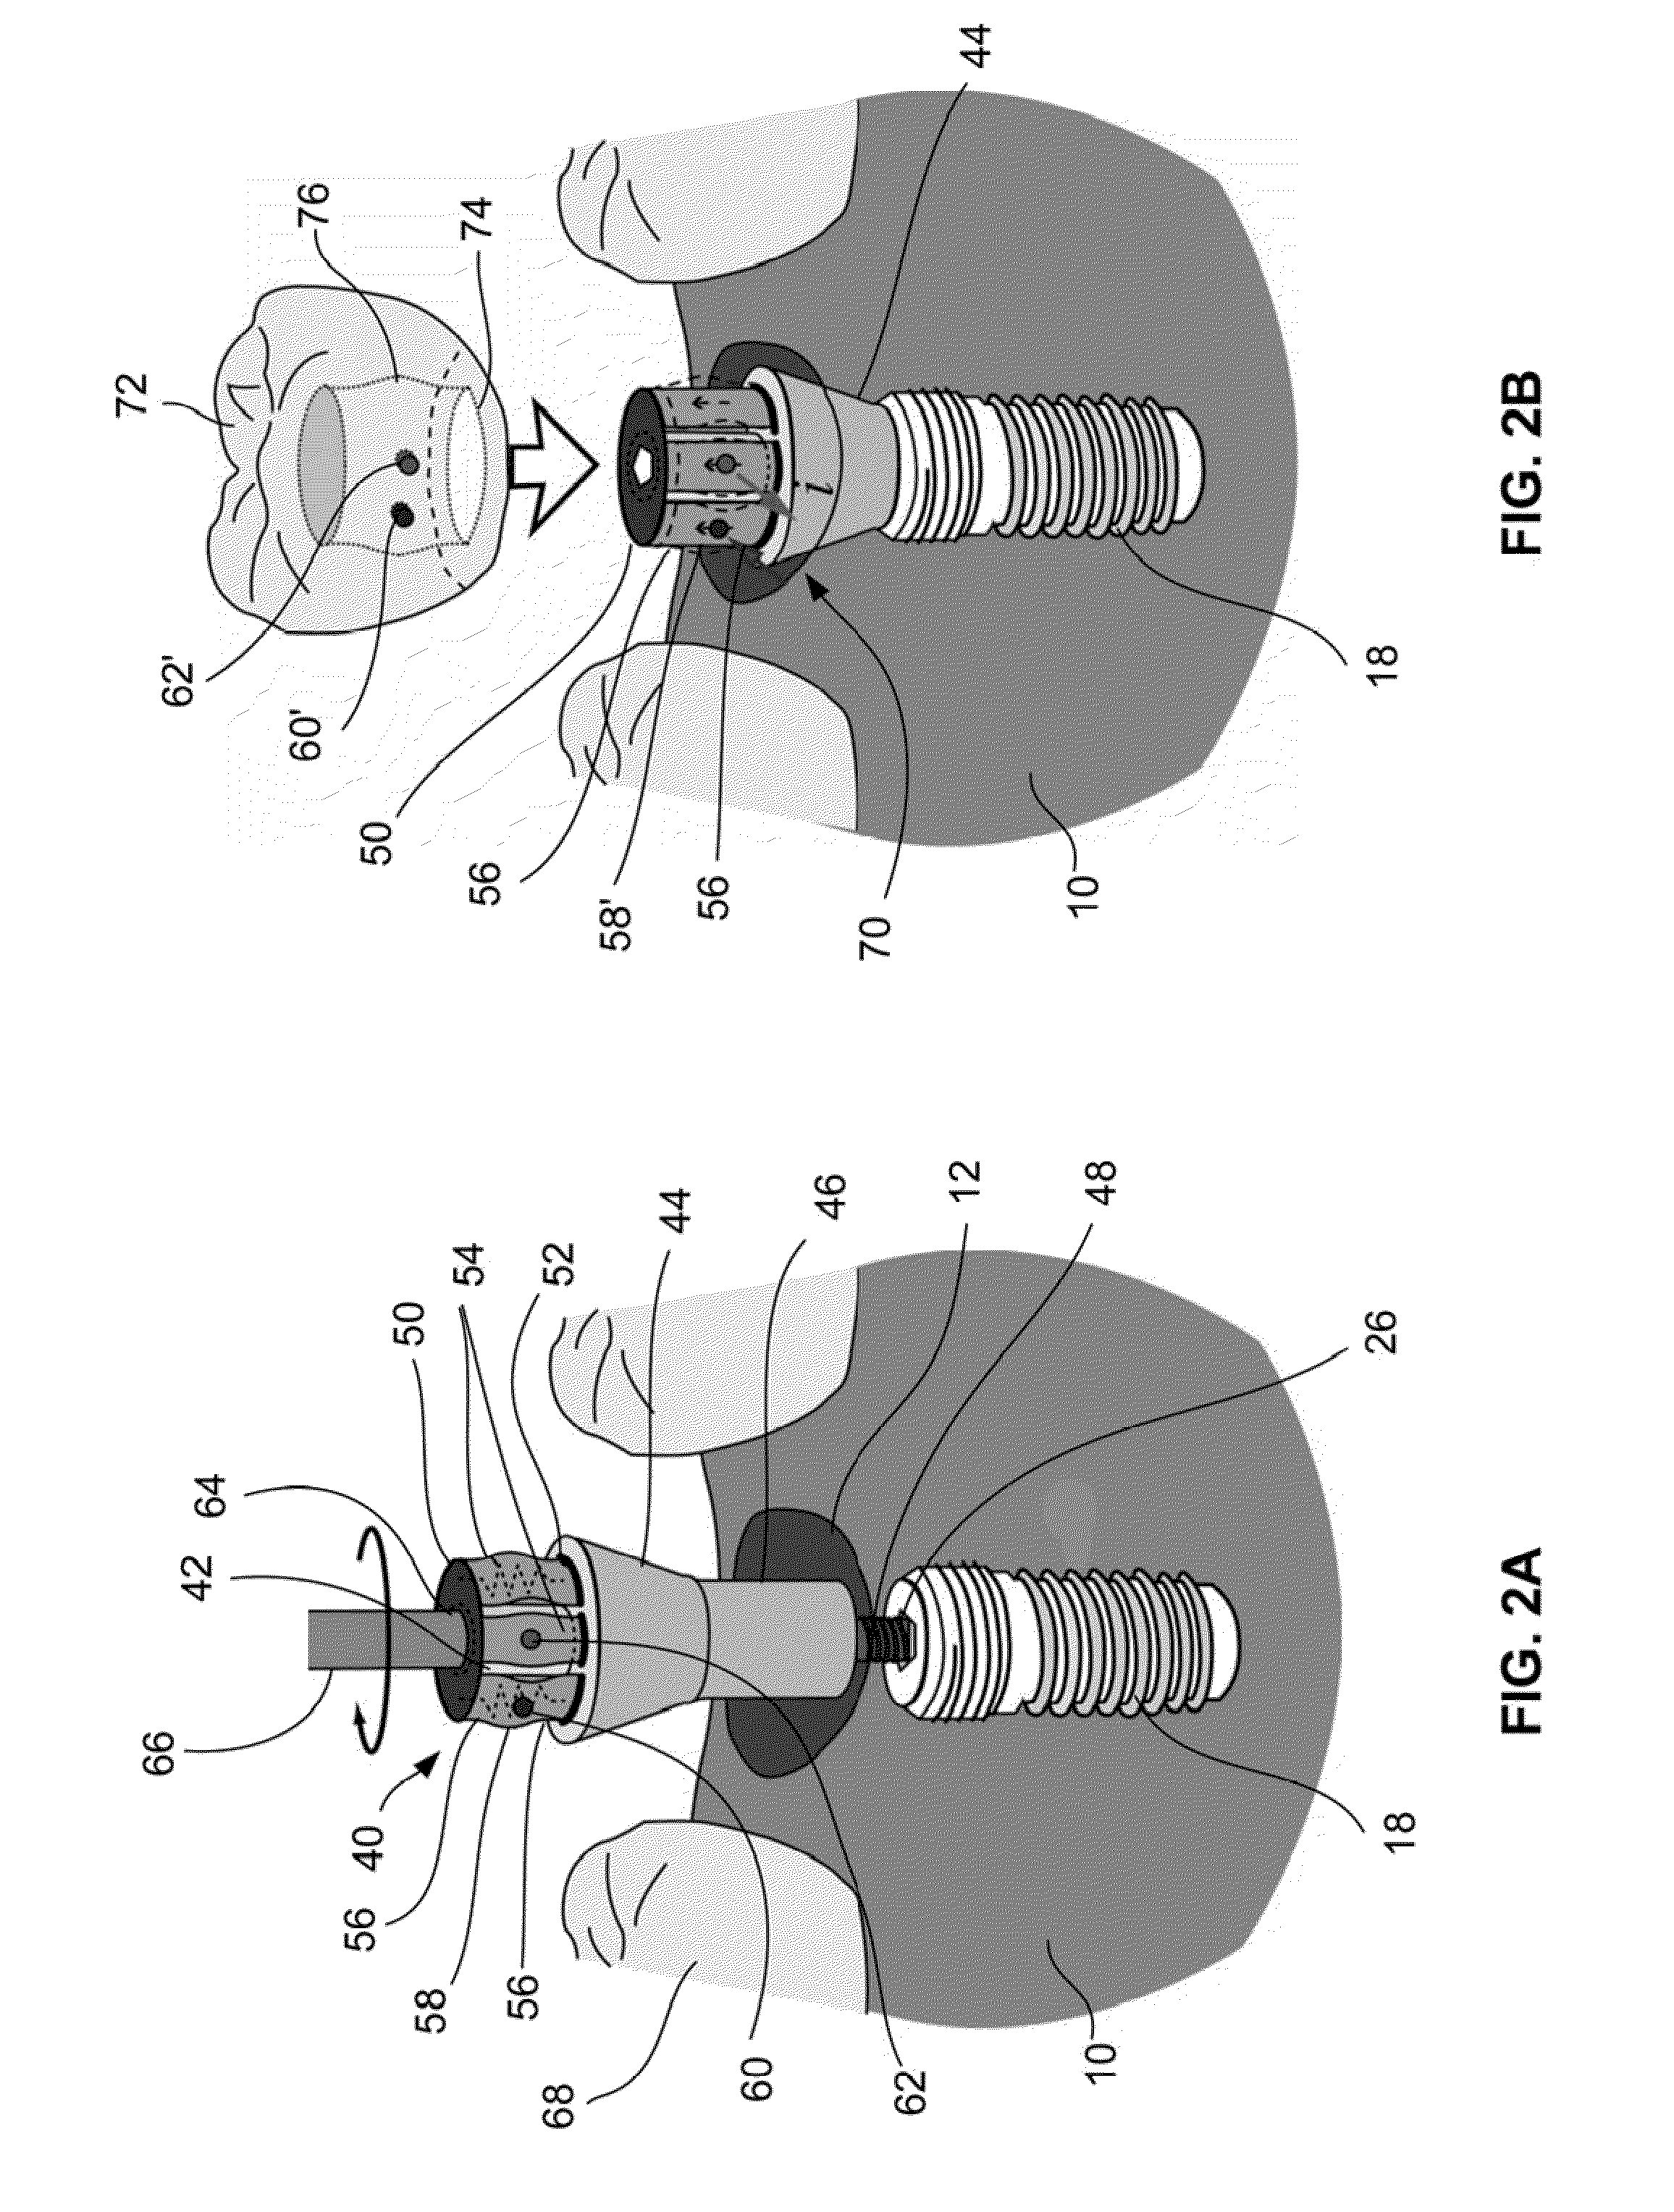 Oral appliance activation devices and methods